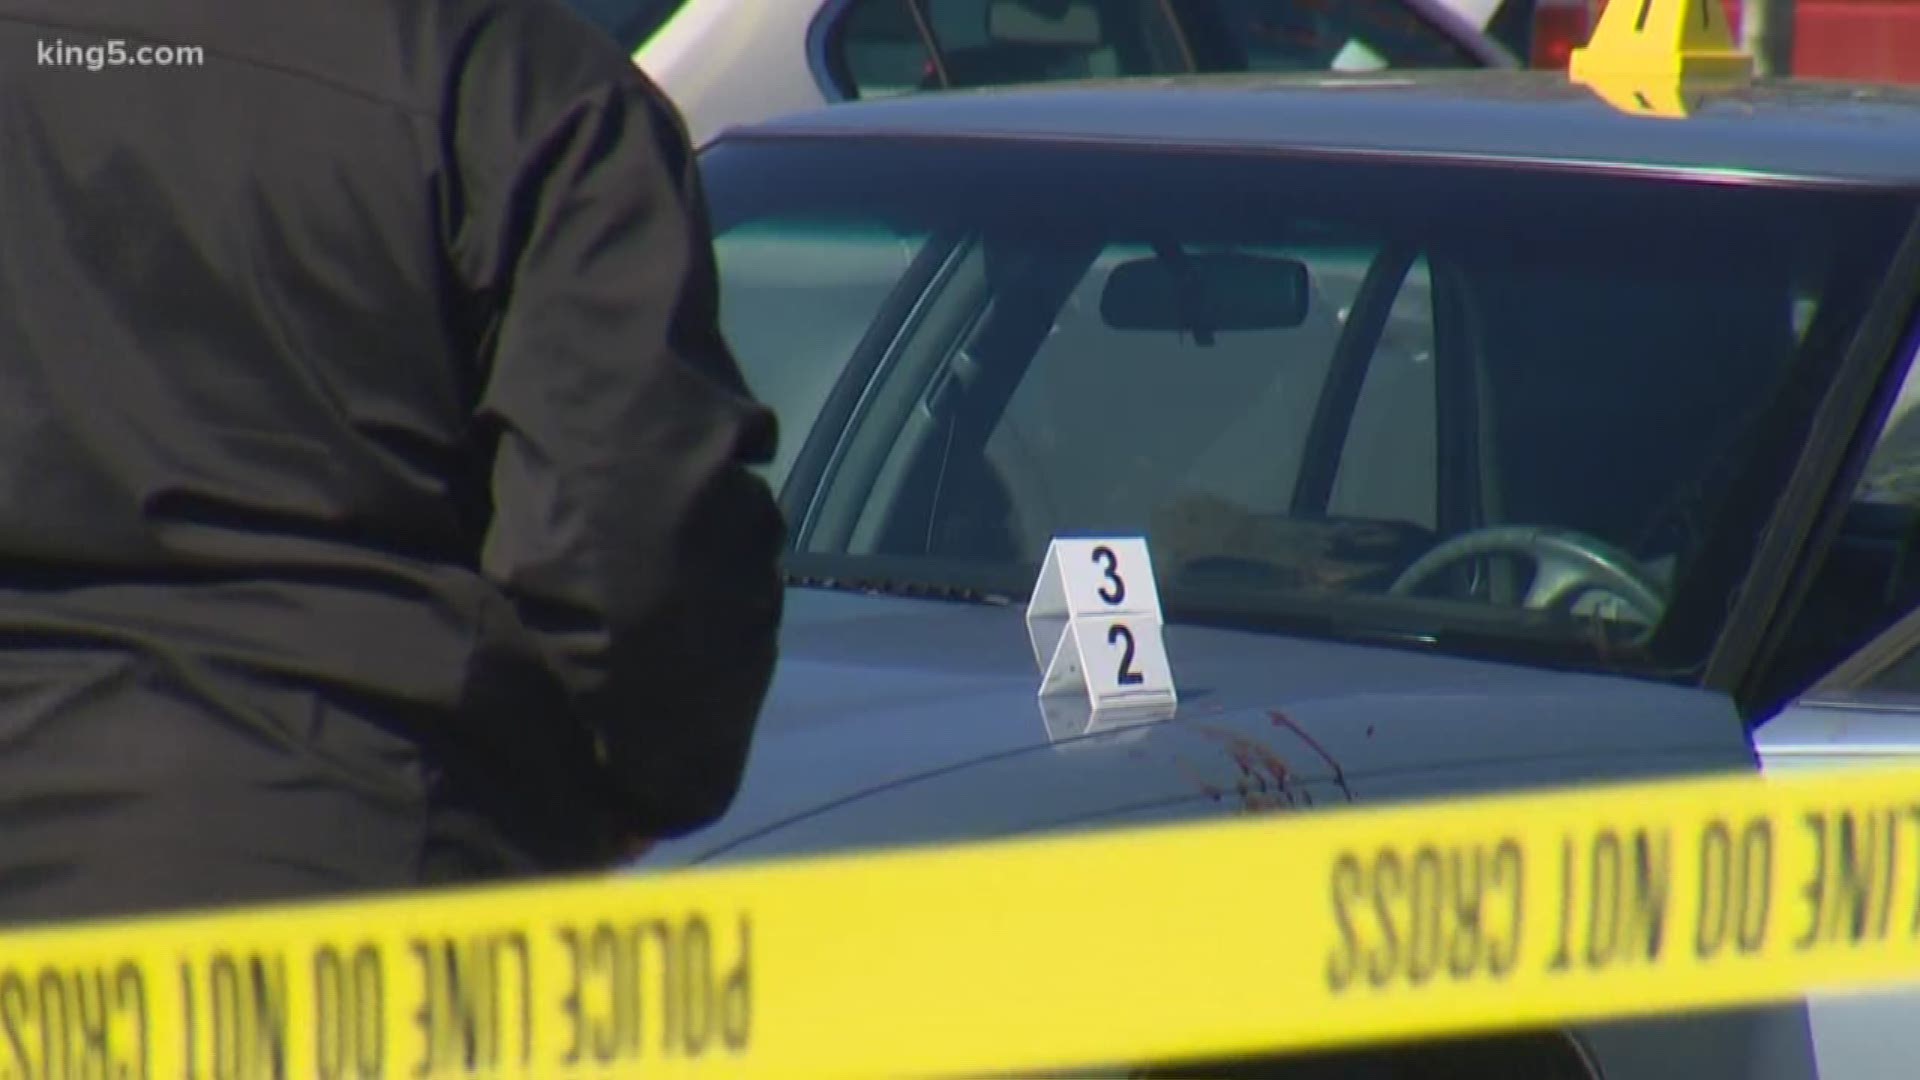 The Snohomish County Sheriff's Office is investigating after a man was shot multiple times in a Fred Meyer parking lot.